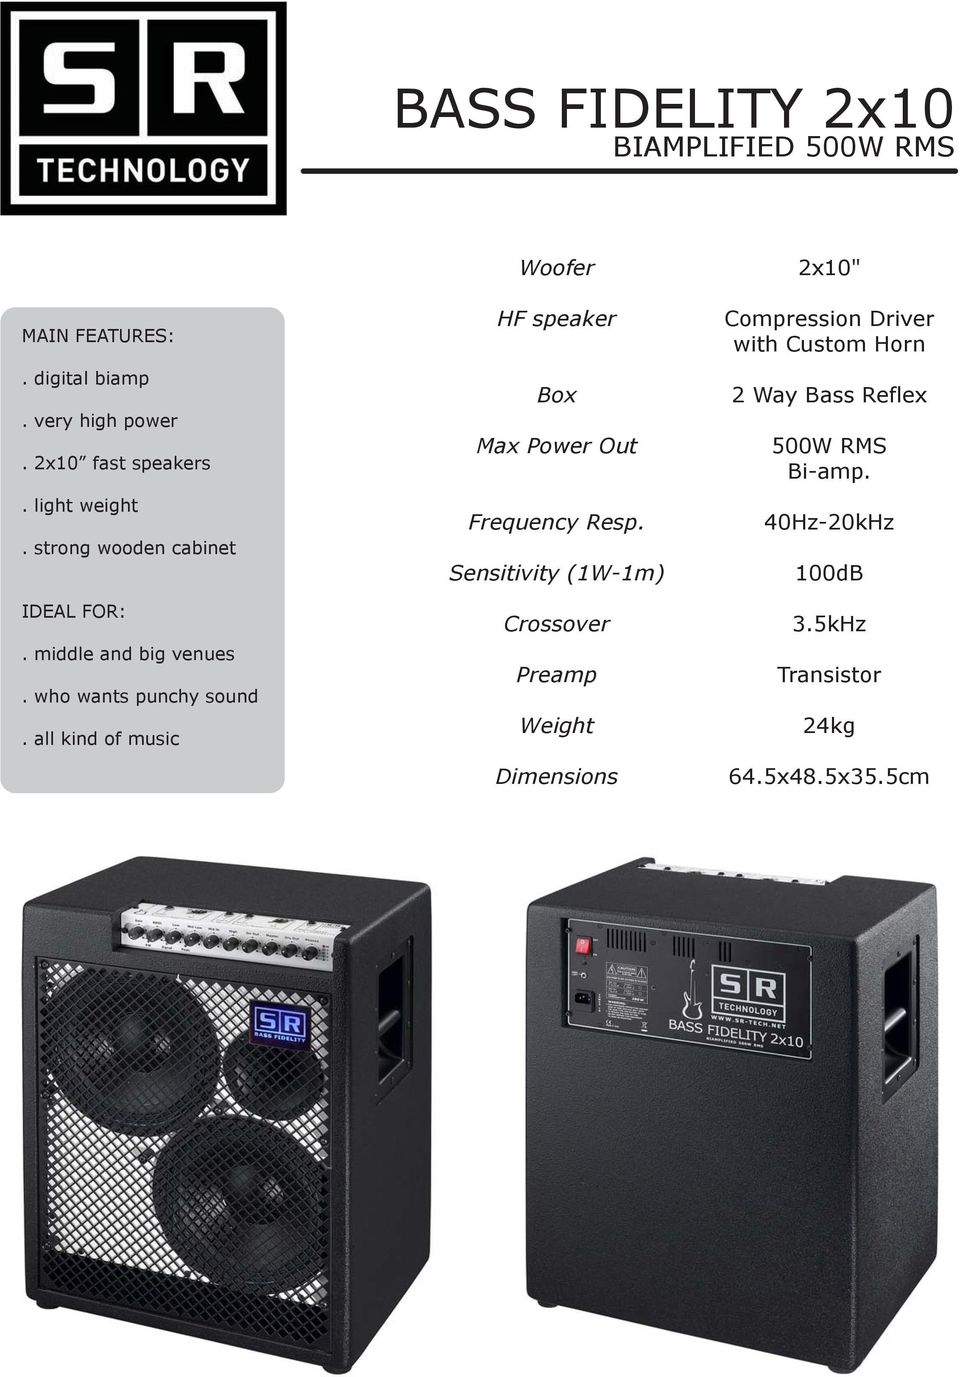 all kind of music Woofer HF speaker Box Max Power Out Frequency Resp.